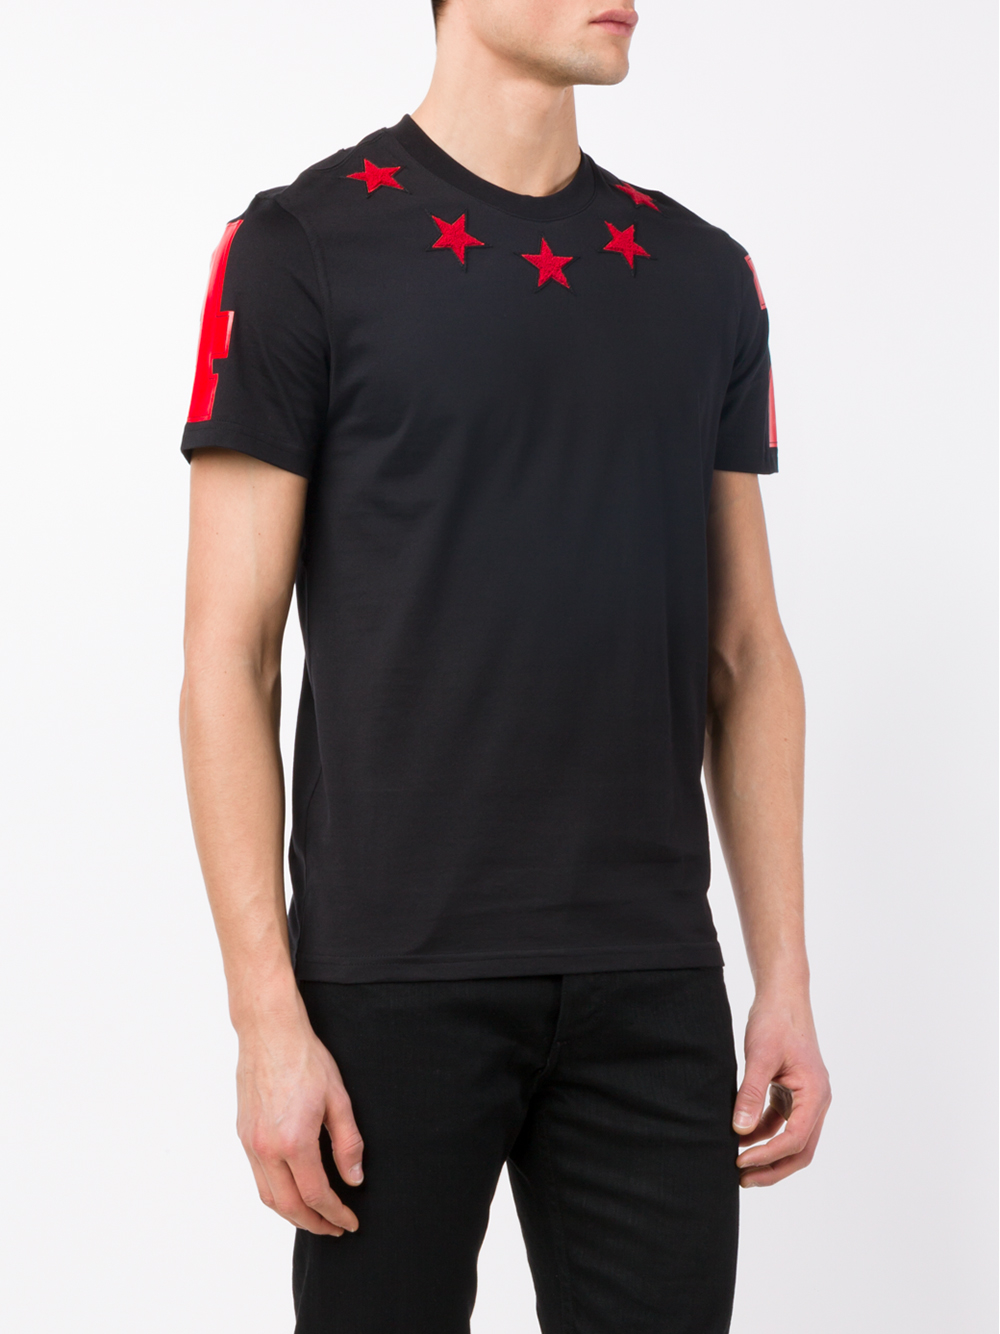 Givenchy Star Embroidered T-shirt in Black for Men - Lyst